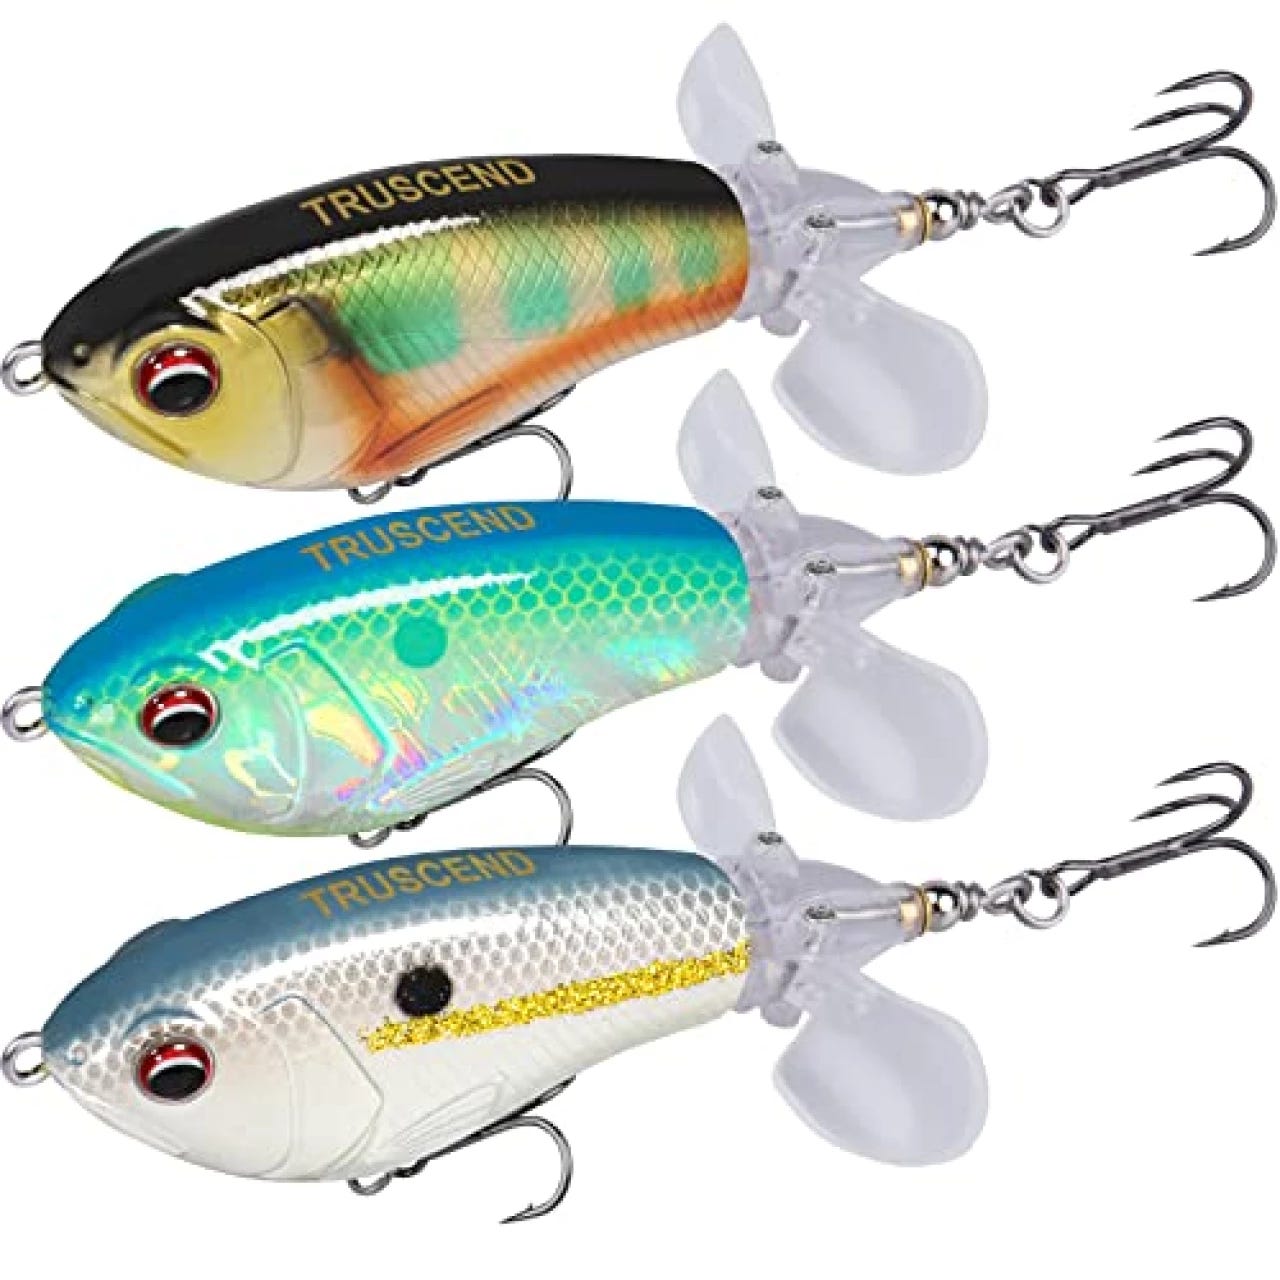 The ultimate trifecta of Atlantic and Gulf saltwater lures in my